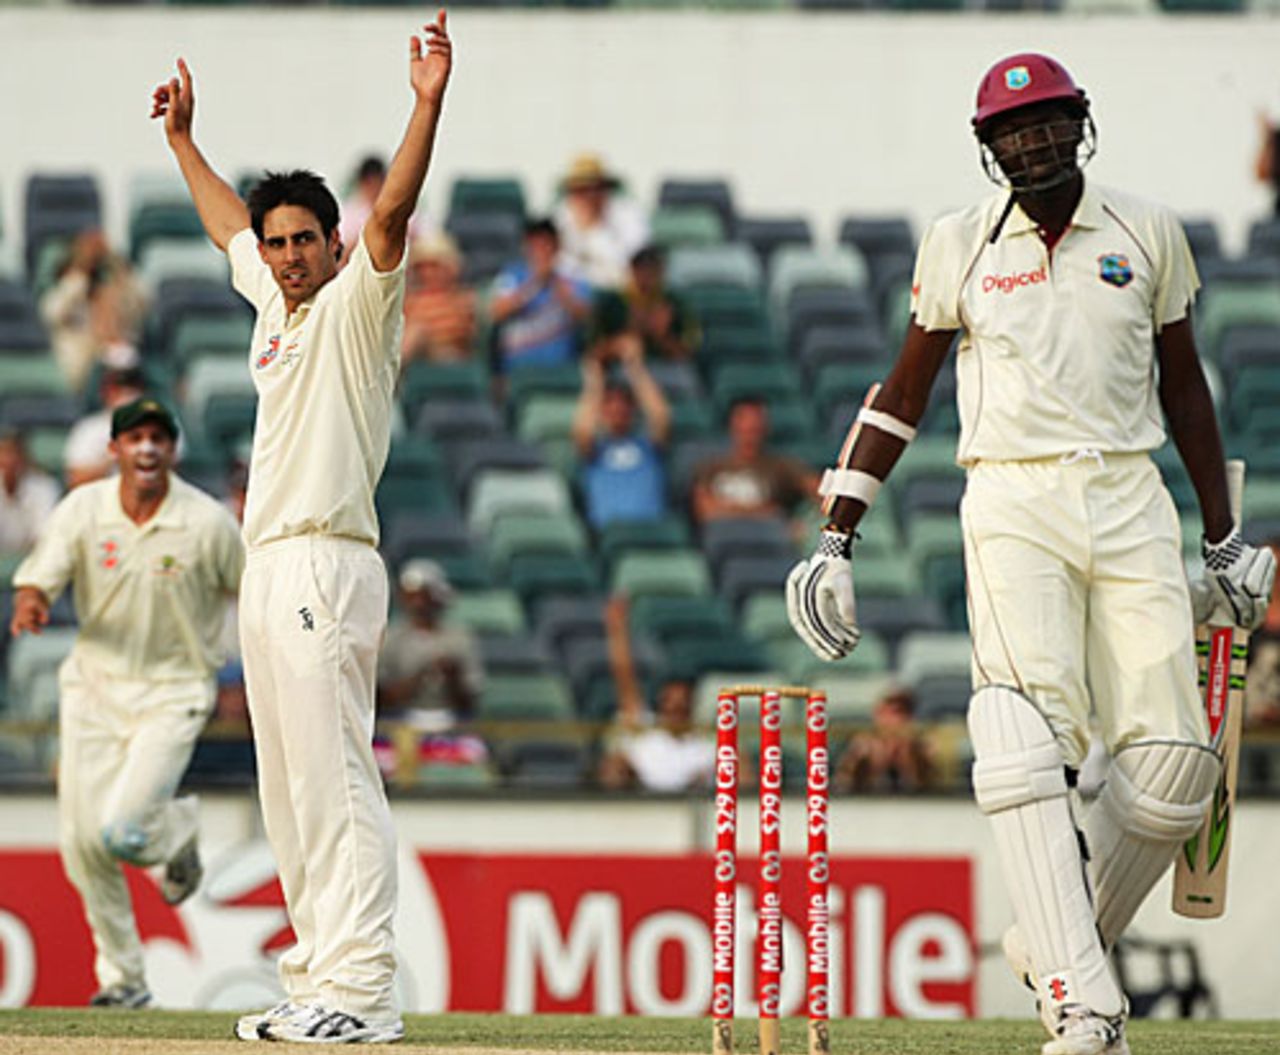 Mitchell Johnson is happy to see the back of Sulieman Benn, Australia v West Indies, 3rd Test, Perth, 4th day, December 19, 2009